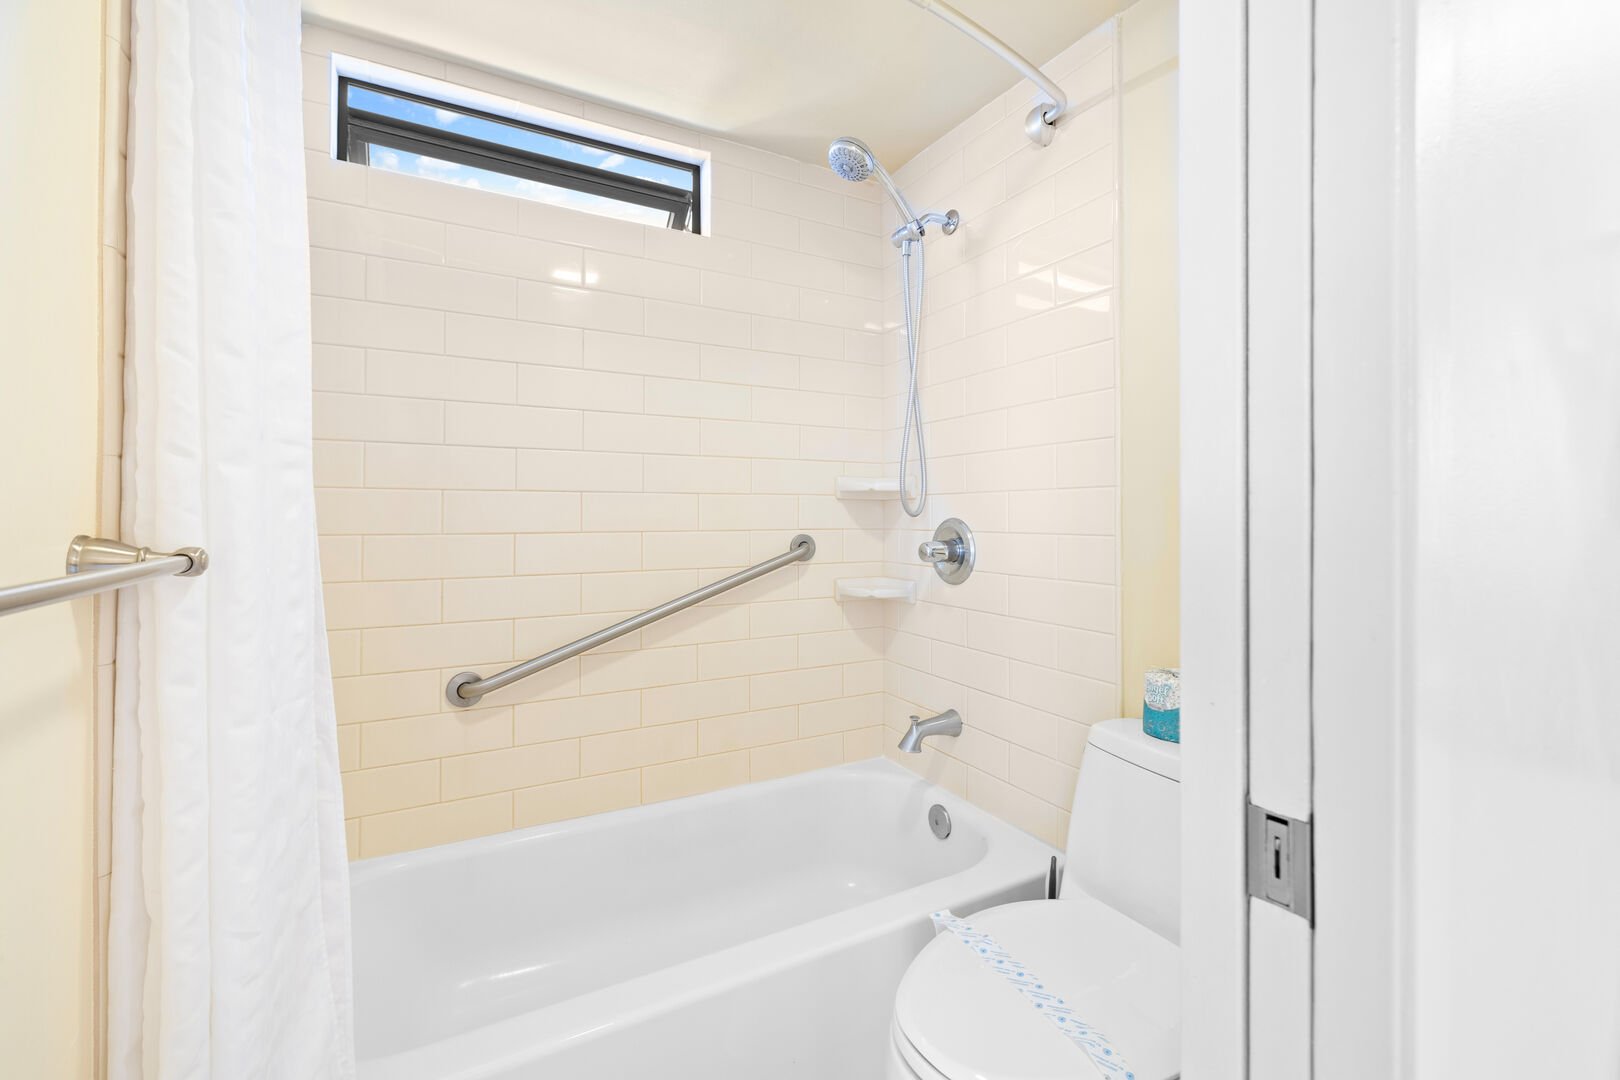 This unit has a full bathroom with tub and shower combination!